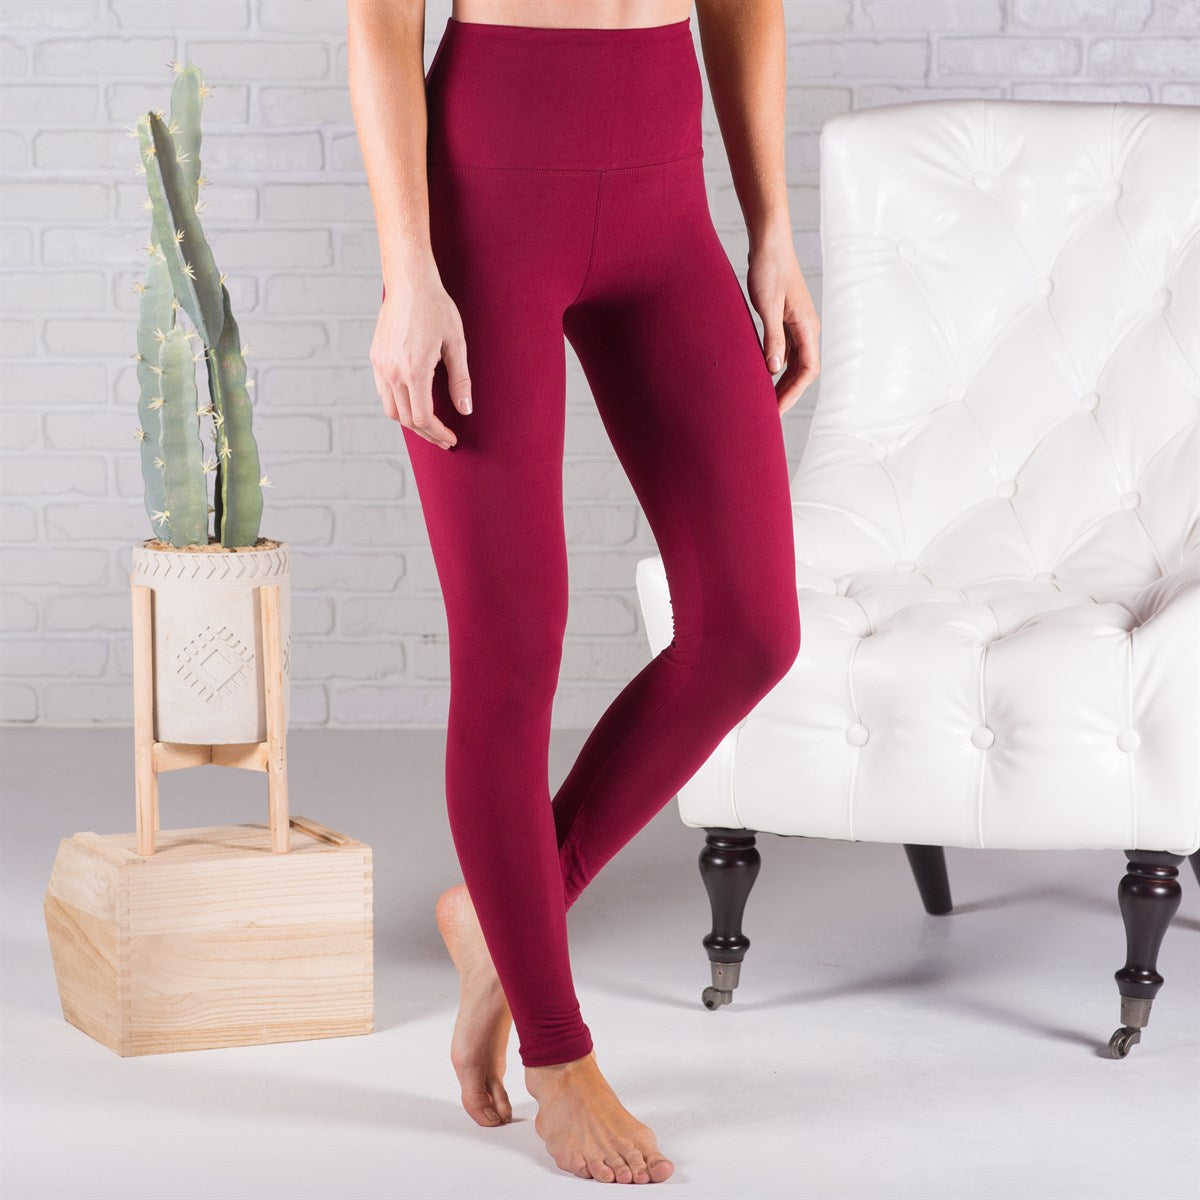 High Waisted Sz Small, Maroon/Chestnut Women's Thermal Fleece Lined Leggings